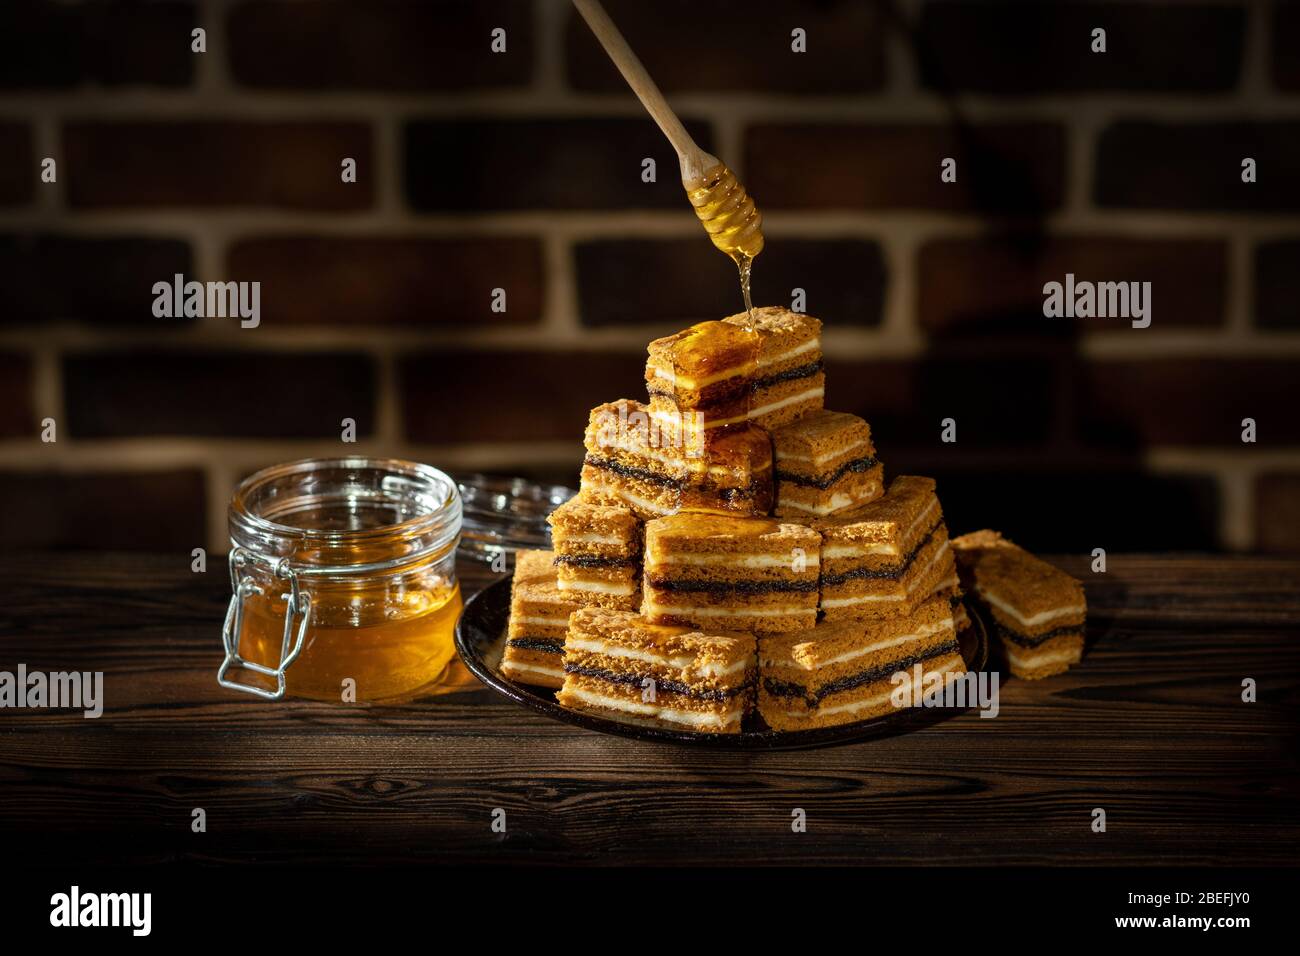 Plate with slices of honey cake and jar with honey on wooden table and brick wall background Stock Photo